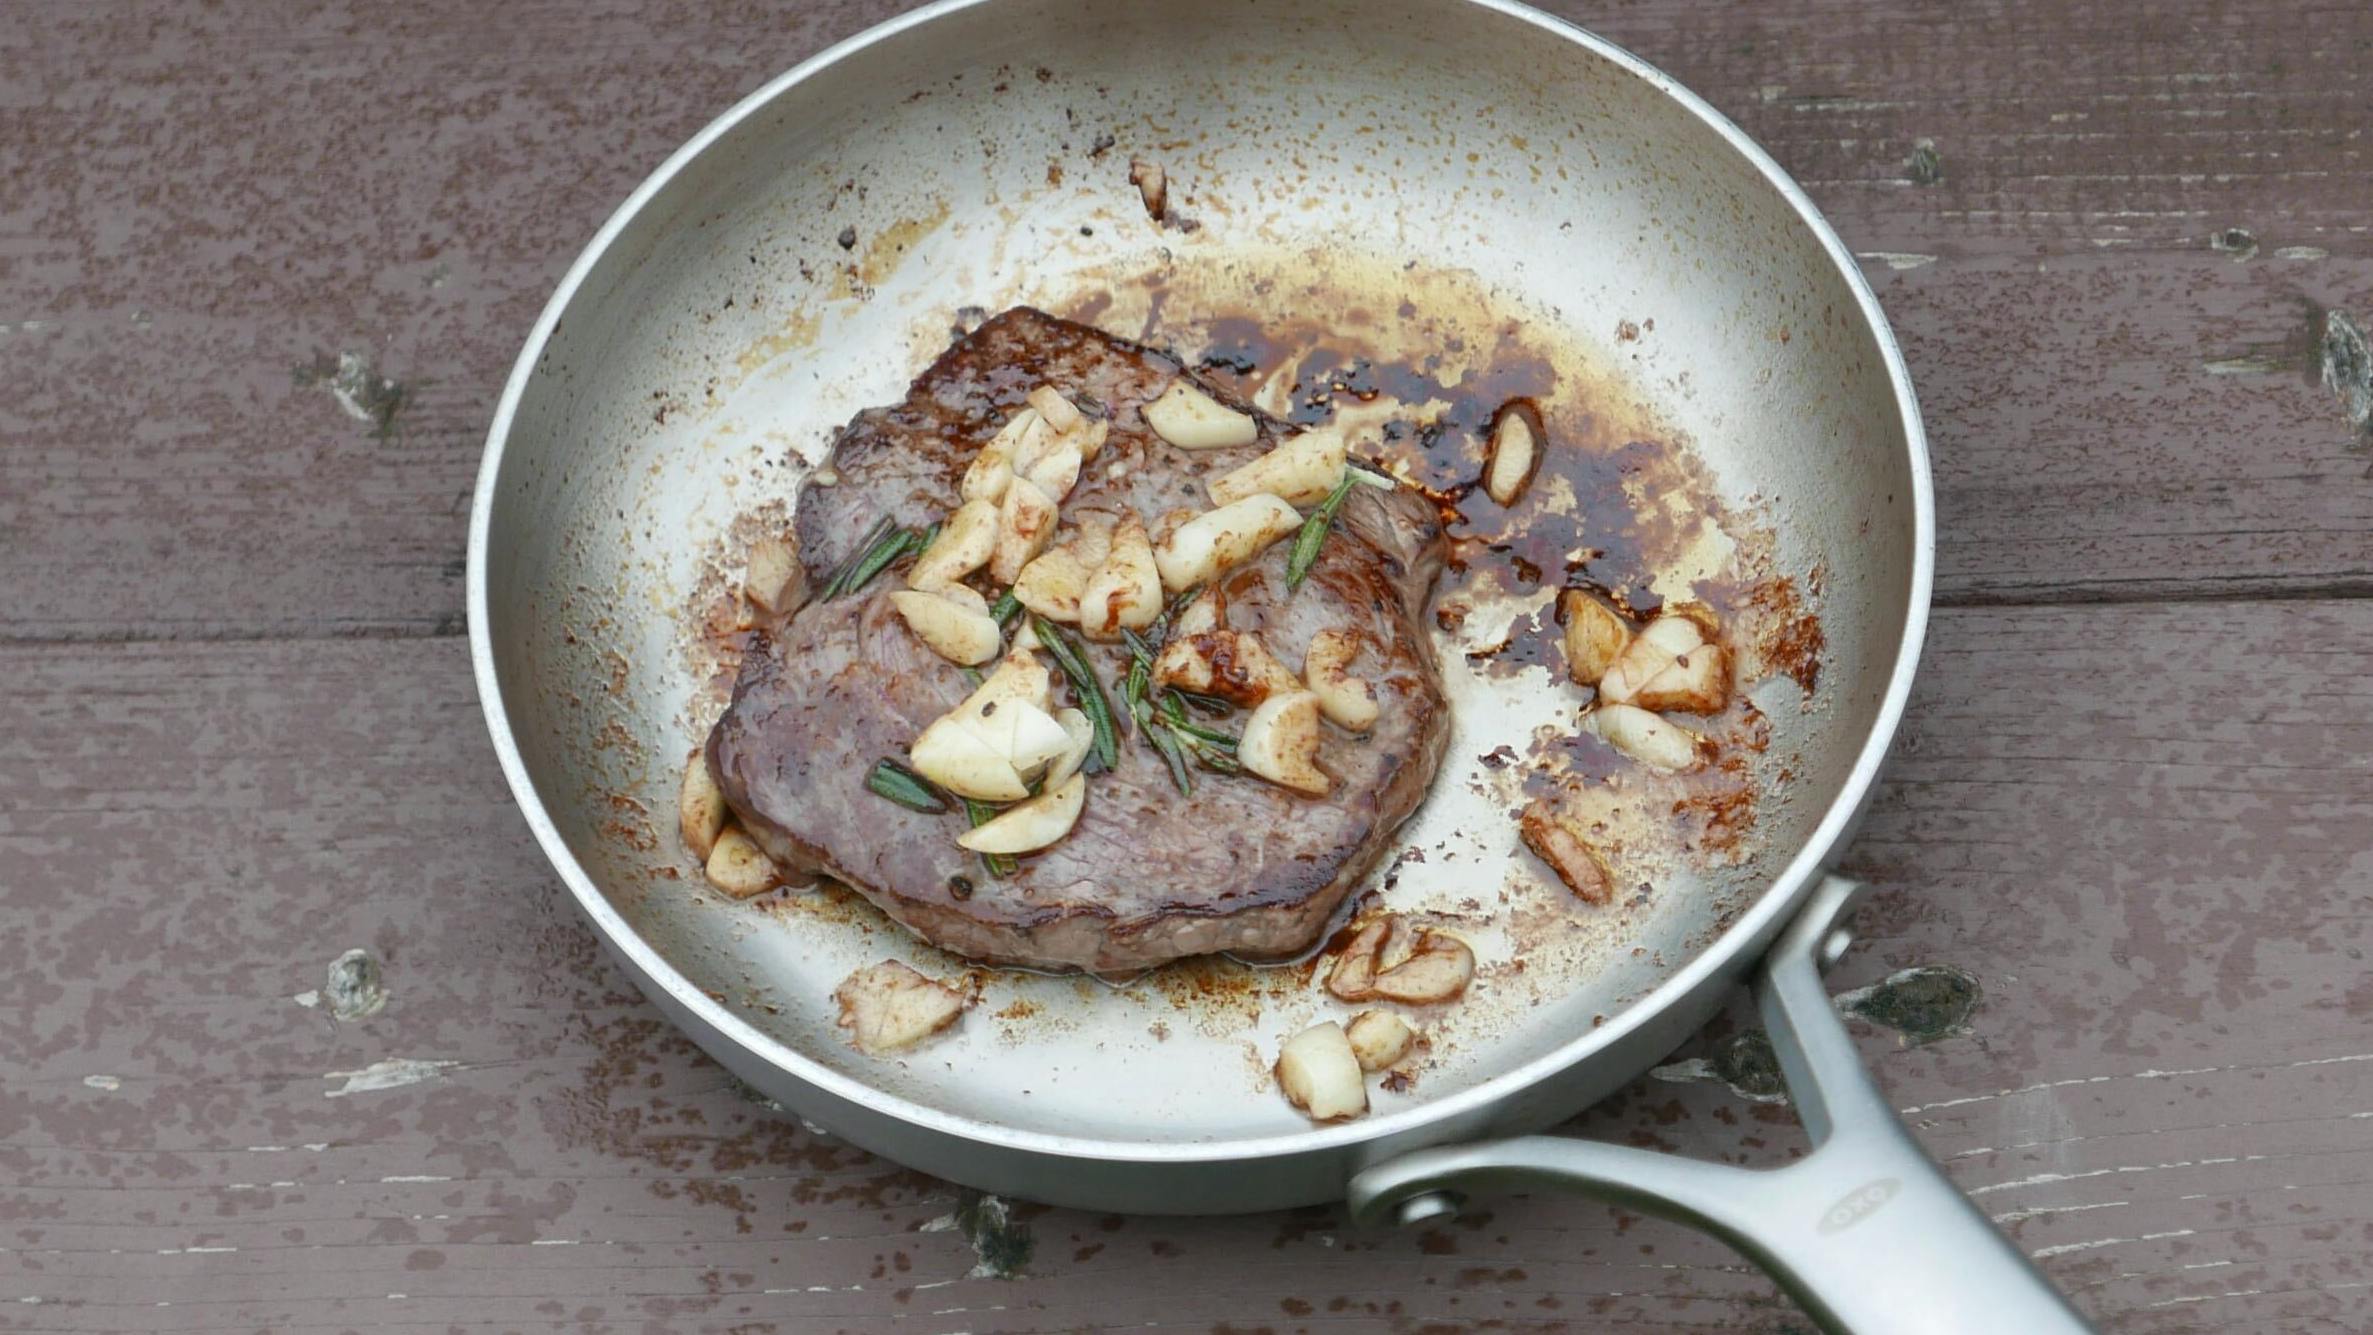 A pan-seared steak sits in the author's frying pan.